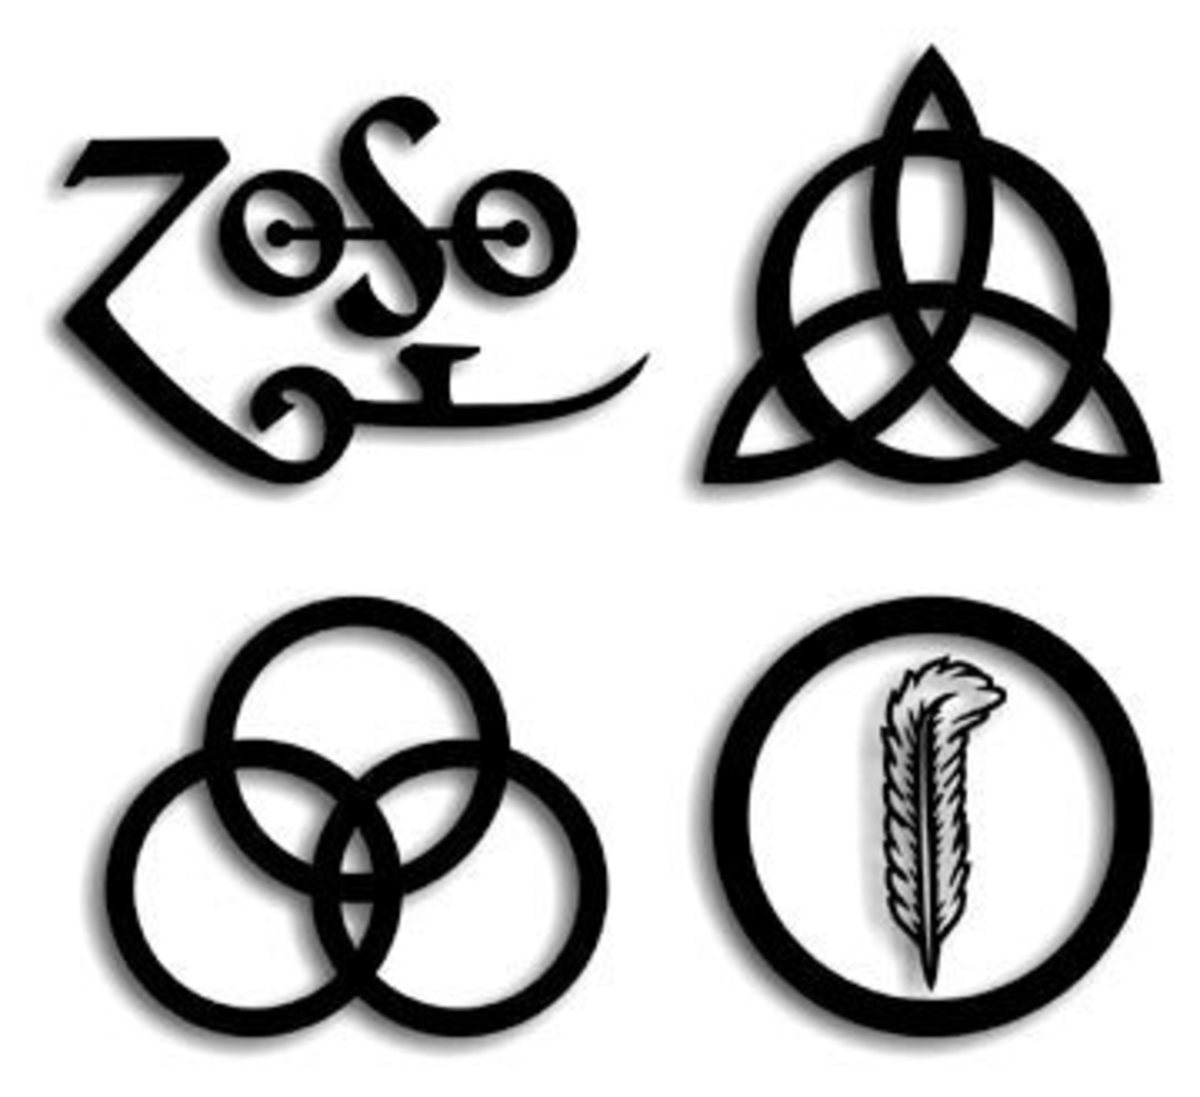 zoso-jimmy-pages-symbol-on-the-led-zeppelin-iv-album